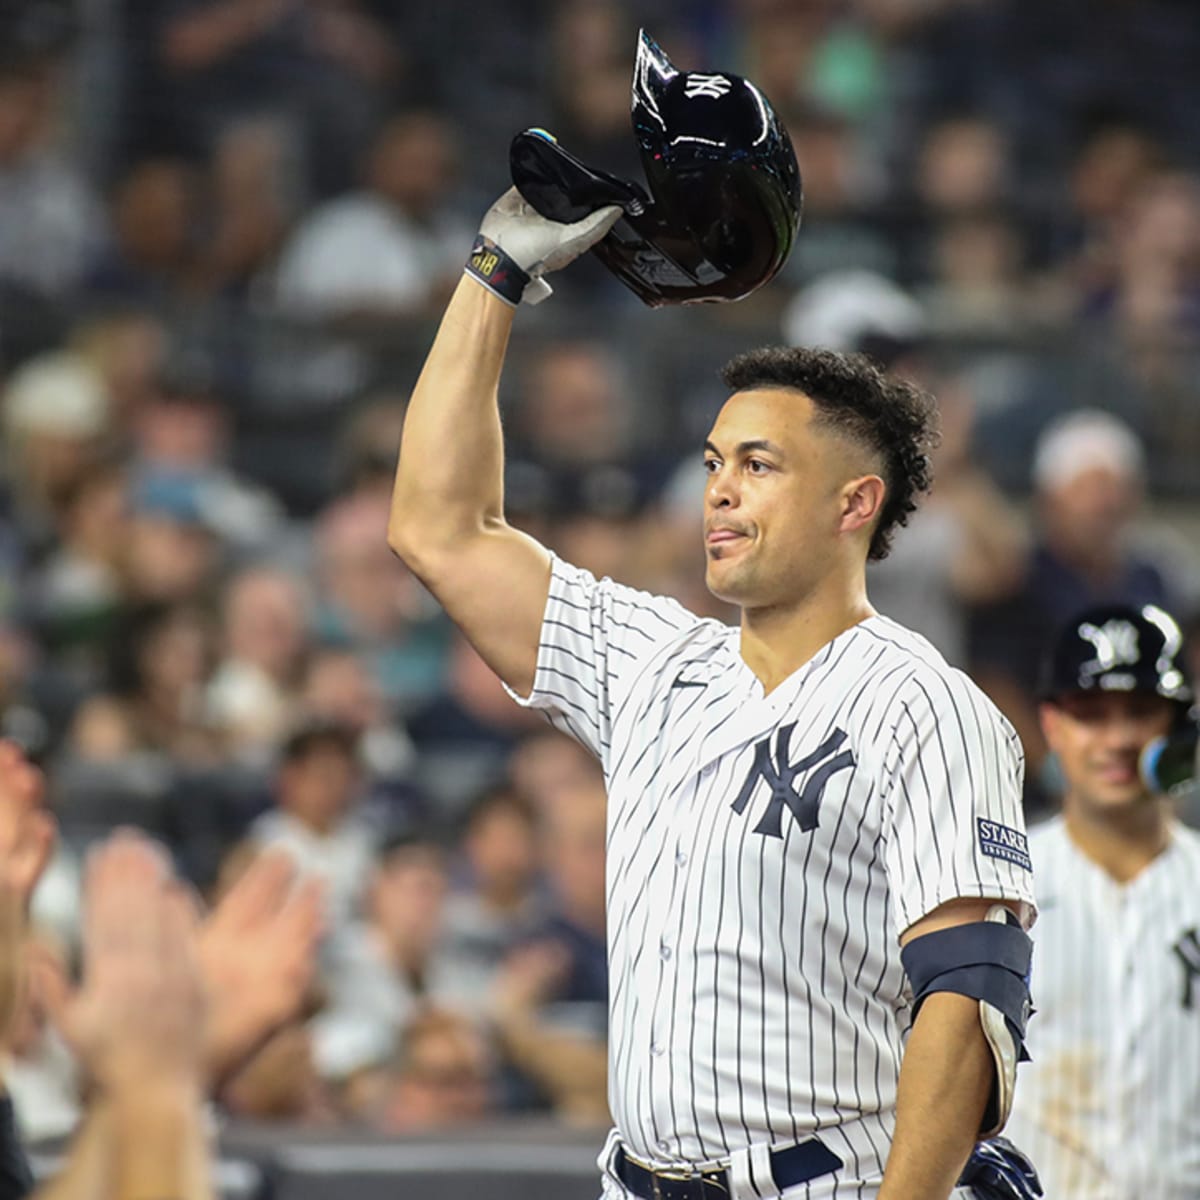 Giancarlo Stanton of Yankees hits home run at MLB All Star Game